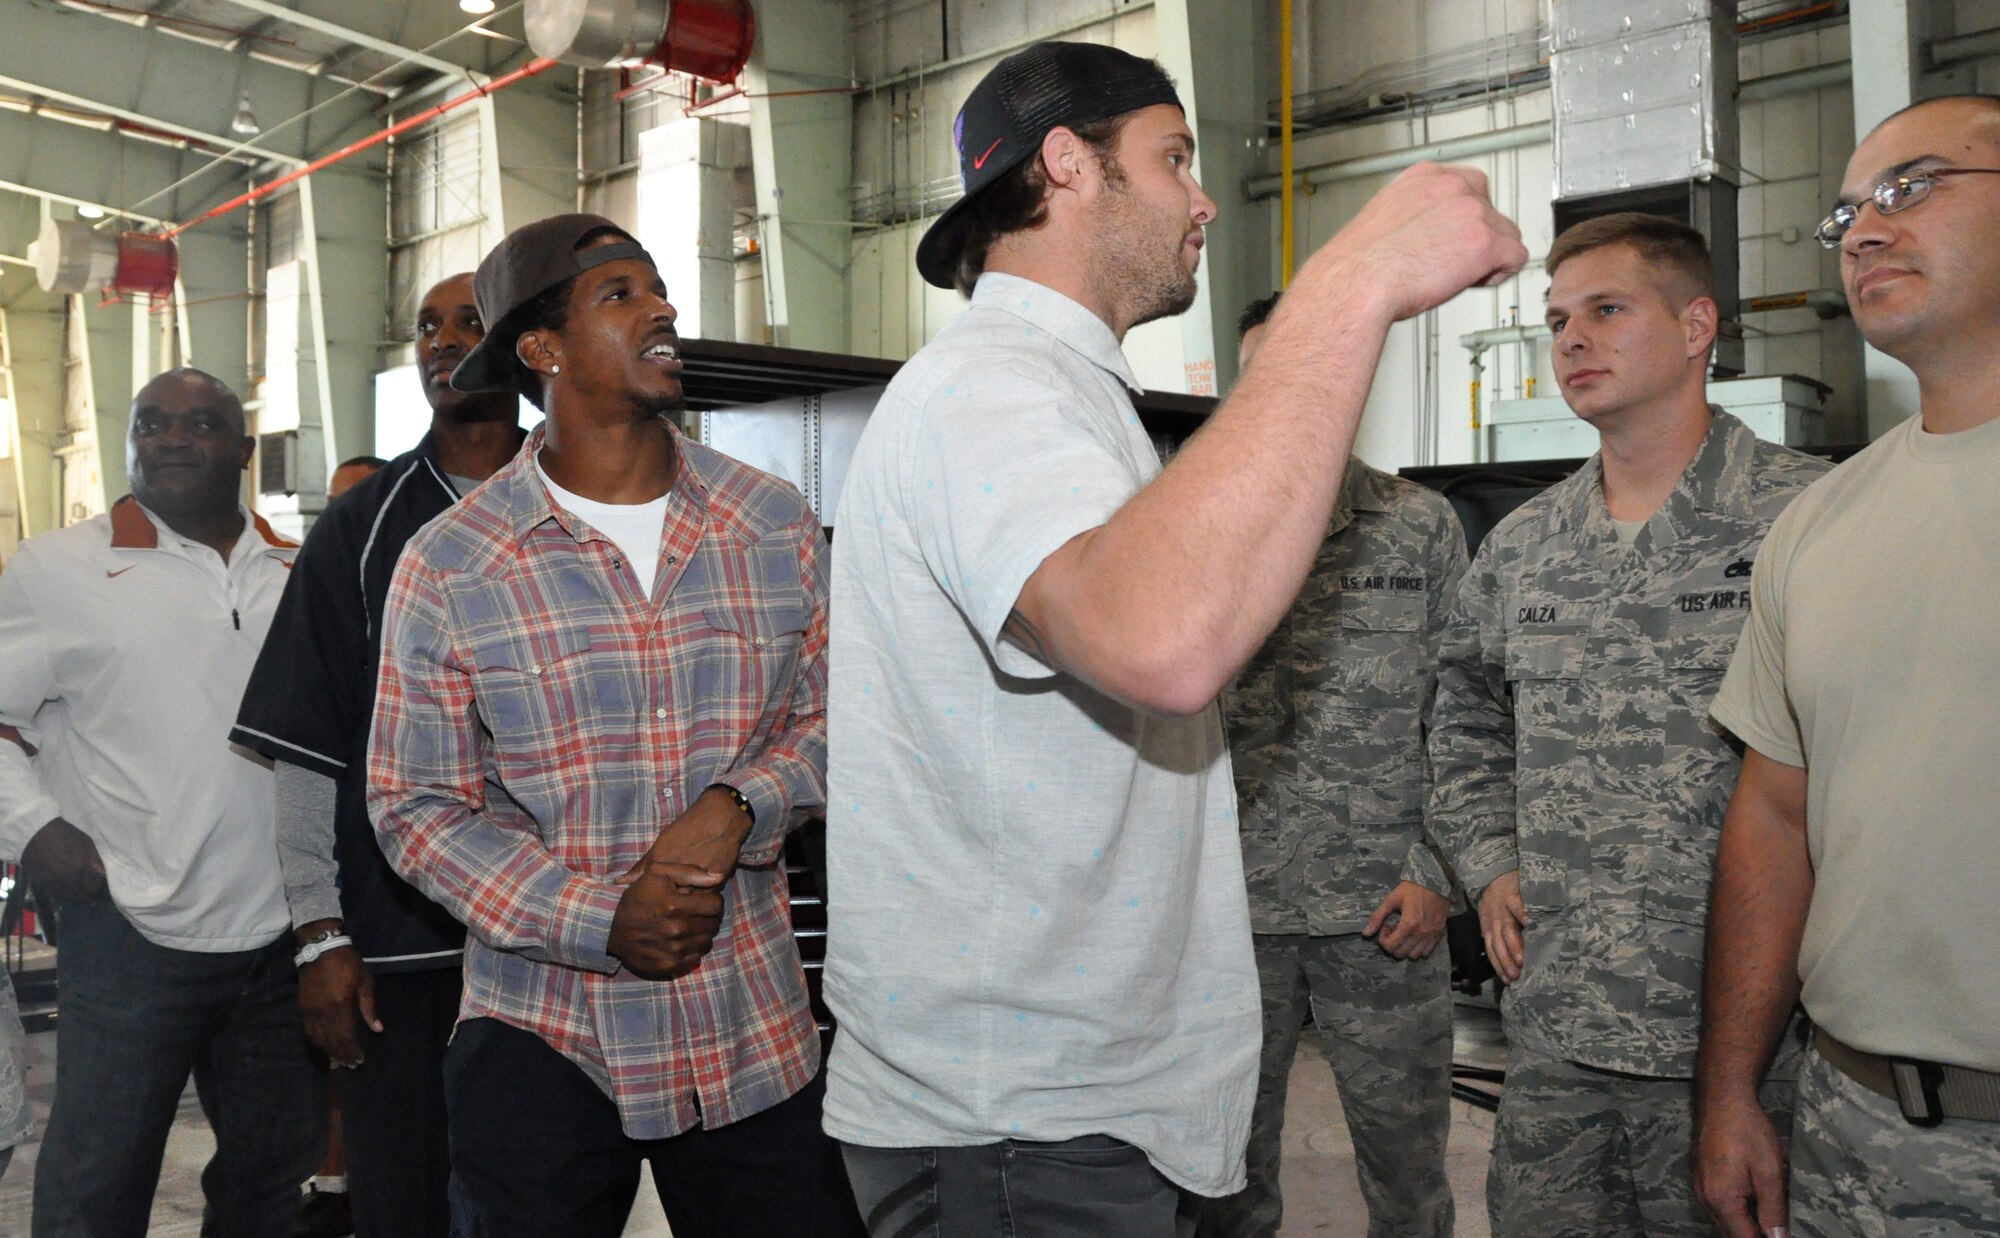 Four former National Football League members took time out to visit with 301st Fighter Wing members Oct. 22 just days before they are to deploy to Southwest Asia. Seen from left to right are James Gray, New England Patriots, Byron Williams, NY Giants, Justin King and David Vabora, both from the St. Louis Rams. (U.S. Air Force photo/MSgt. Julie Briden-Garcia)